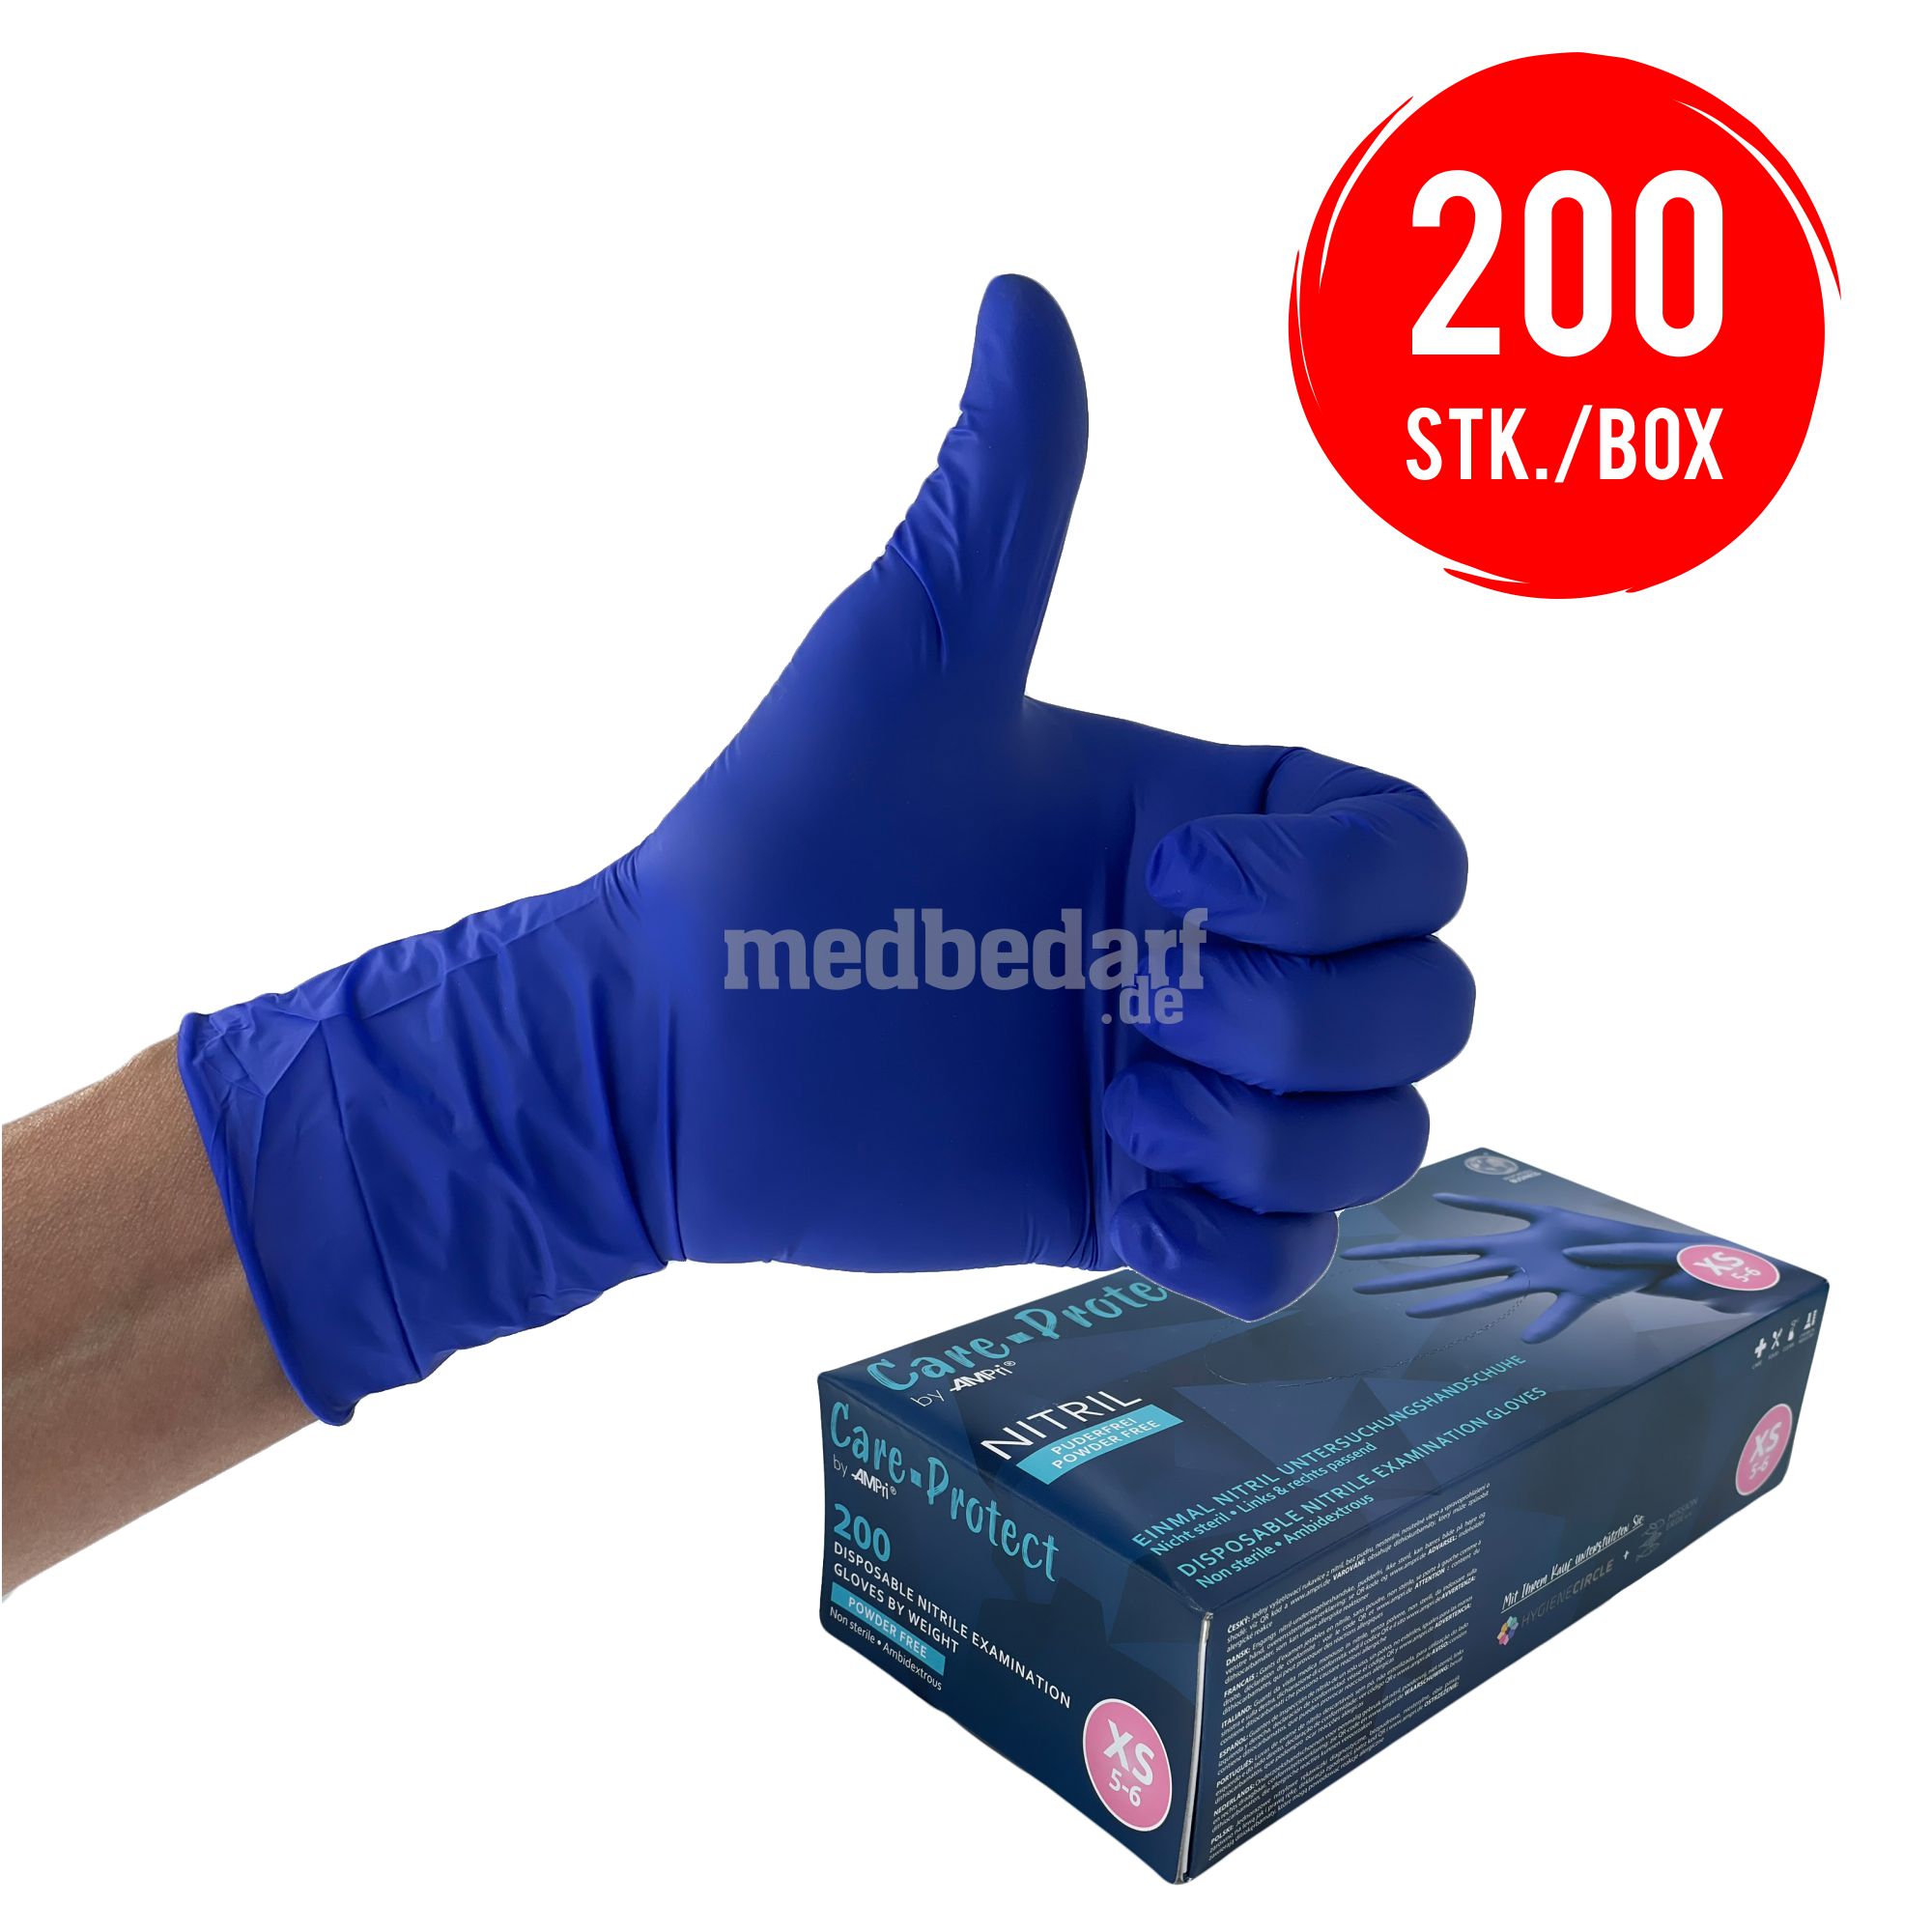 Nitril-Handschuh, Care-Protect, 200 Stück, puderfrei Gr. XS